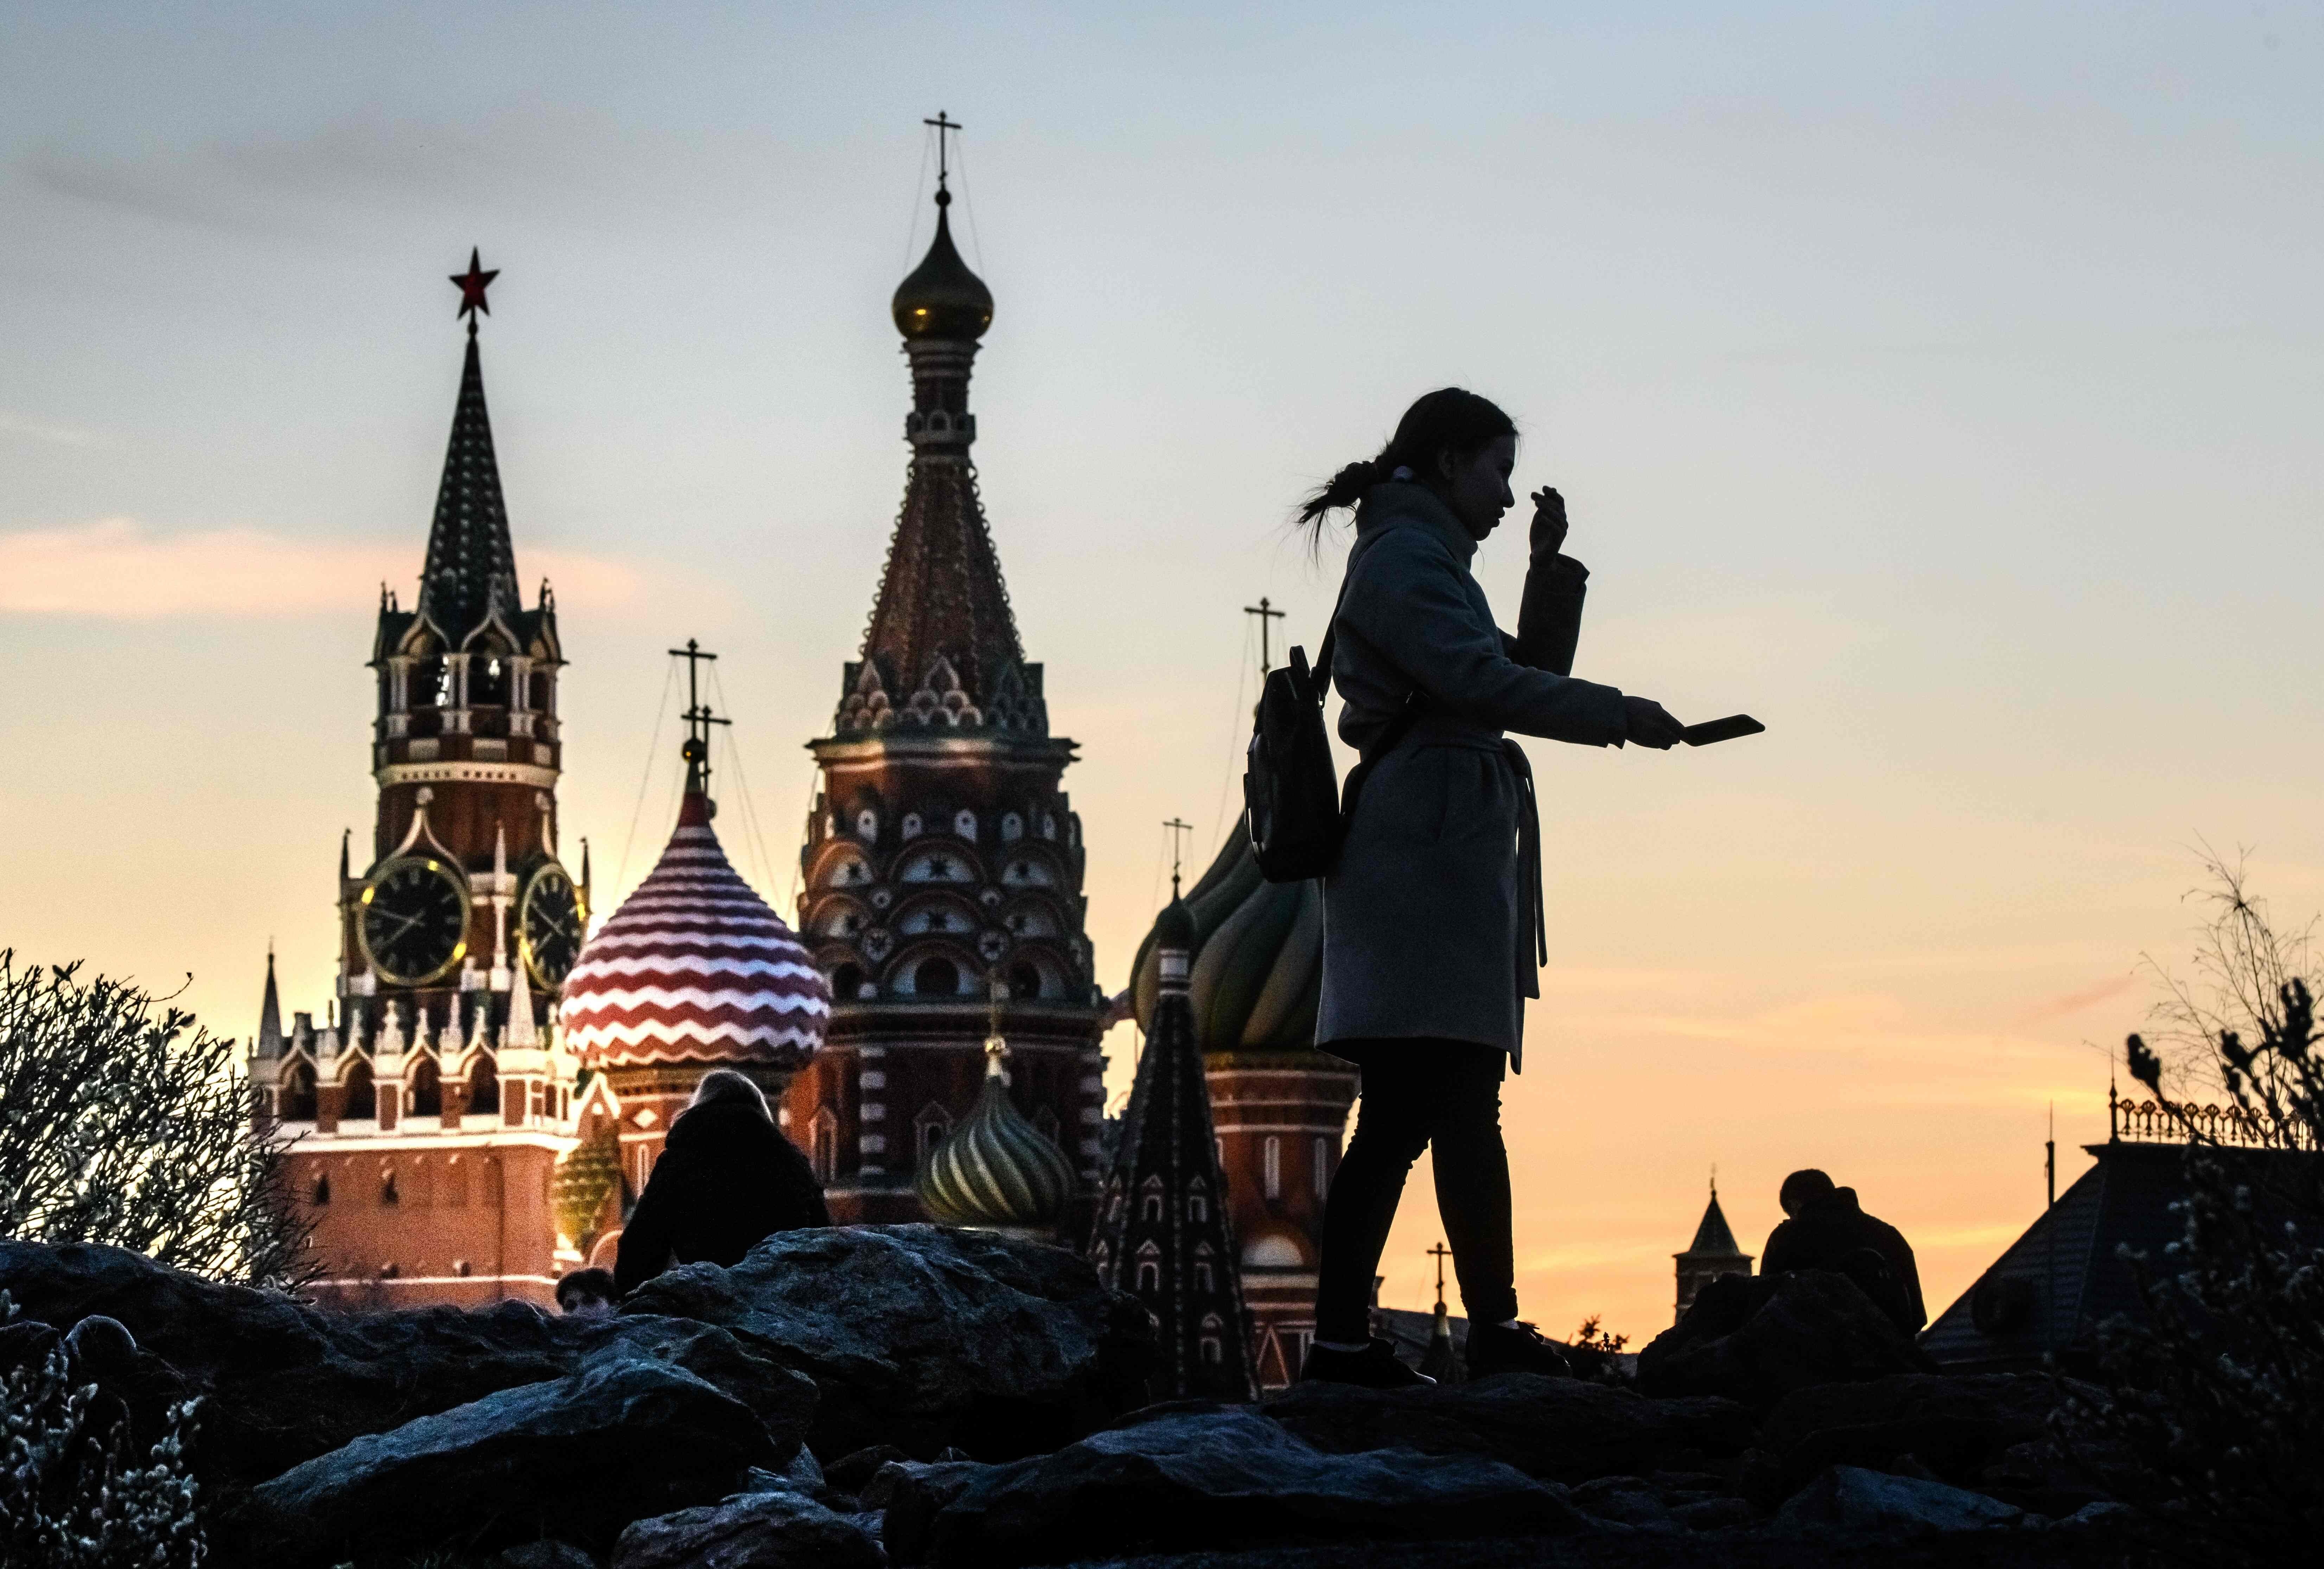 A woman takes a selfie in front of the Kremlin and St Basil’s Cathedral at sunset in Moscow on April 19, 2019. Declining oil prices and a global recession have raised fears about the sustainability of Russia’s economic model. Photo: AFP